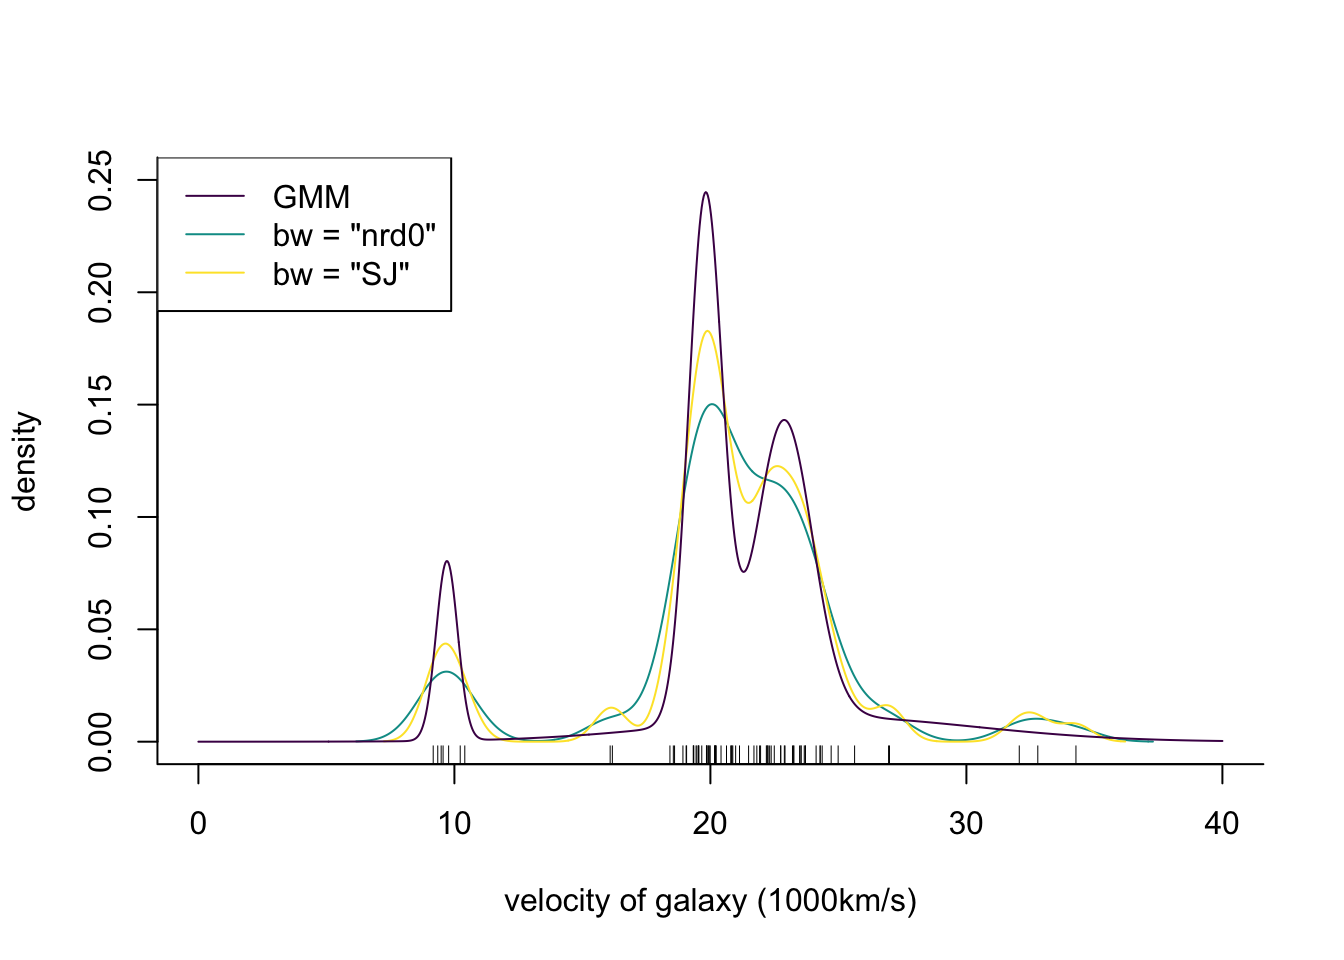 Density of galaxy velocities in 1000km/s, using two kernel density estimators with gaussian kernel but different bandwidth selection procedures, and a mixture of 4 normal densities.